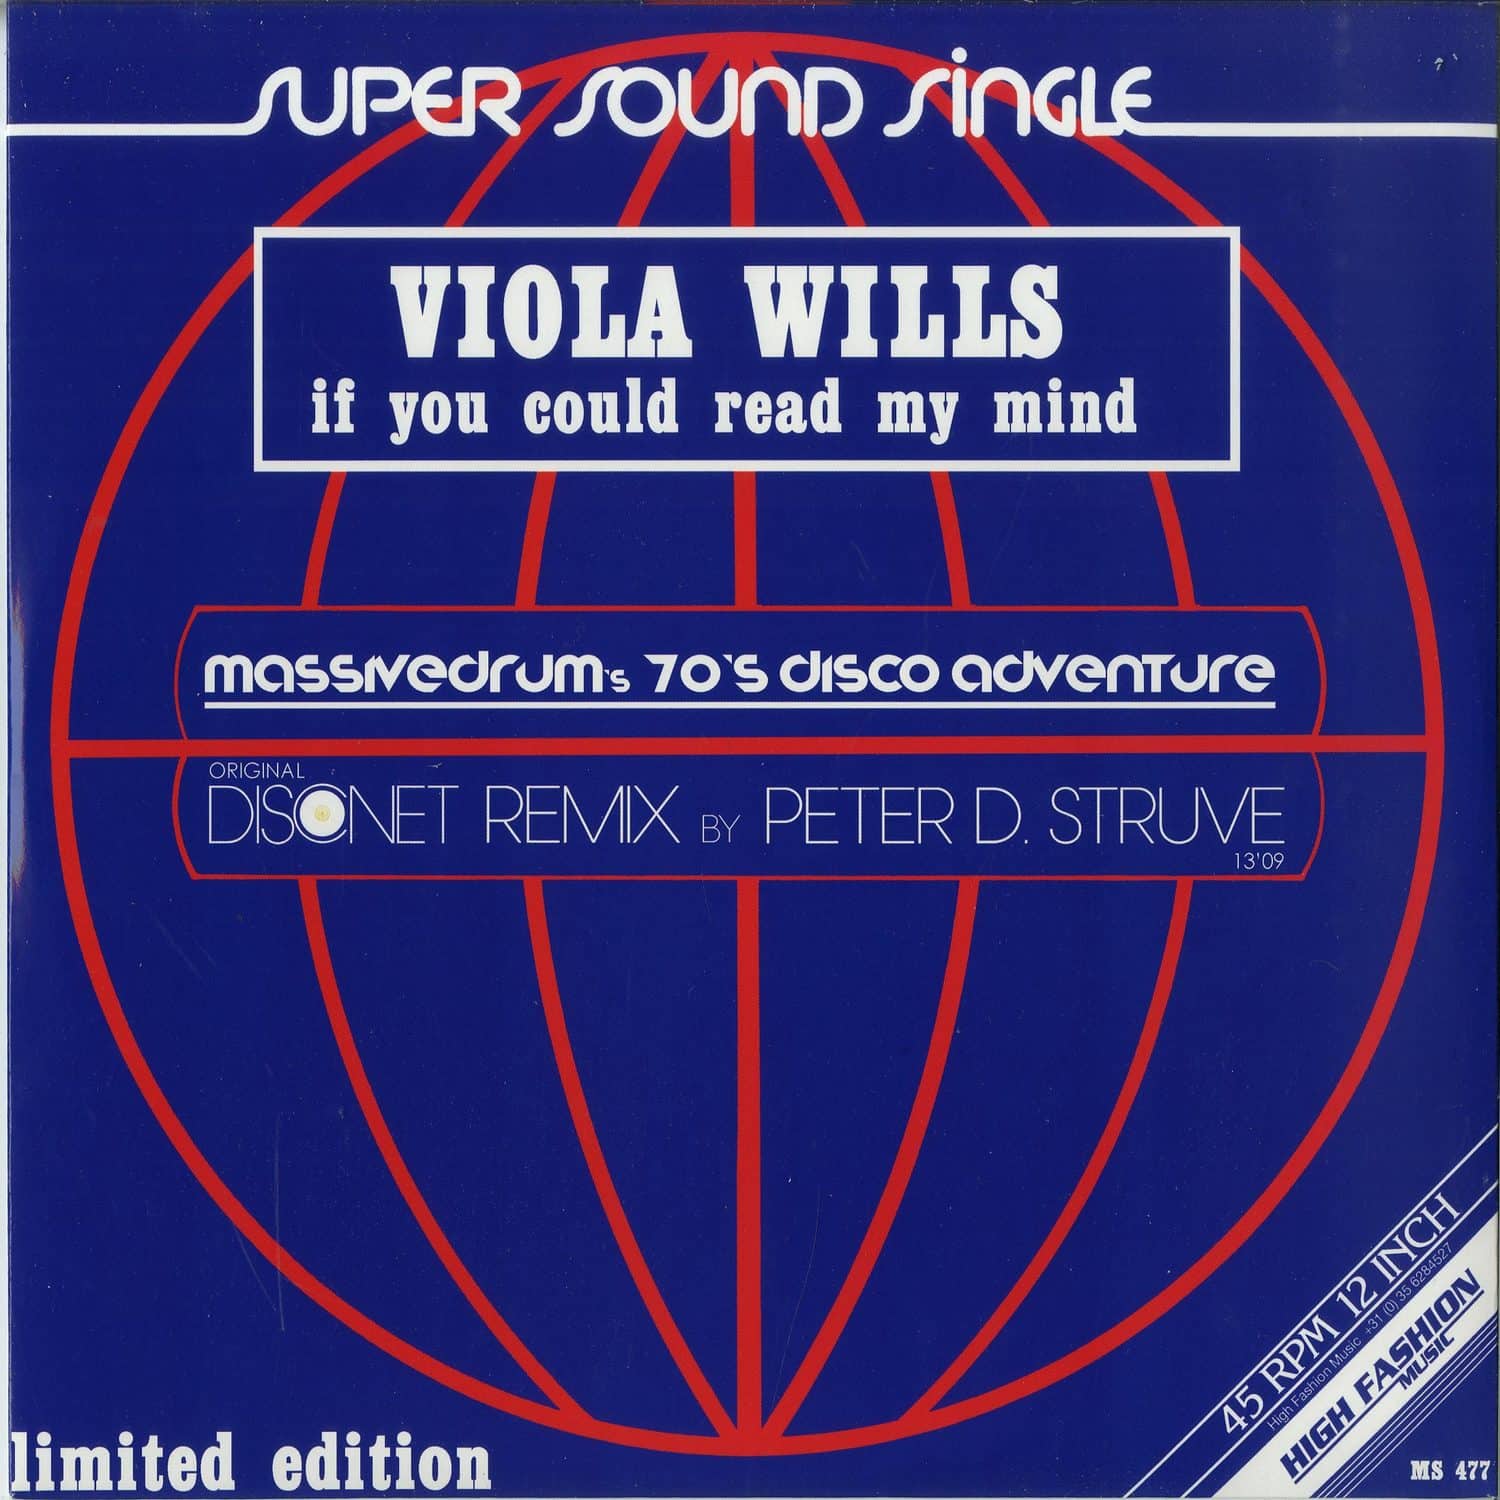 Viola Wills - IF YOU COULD READ MY MIND